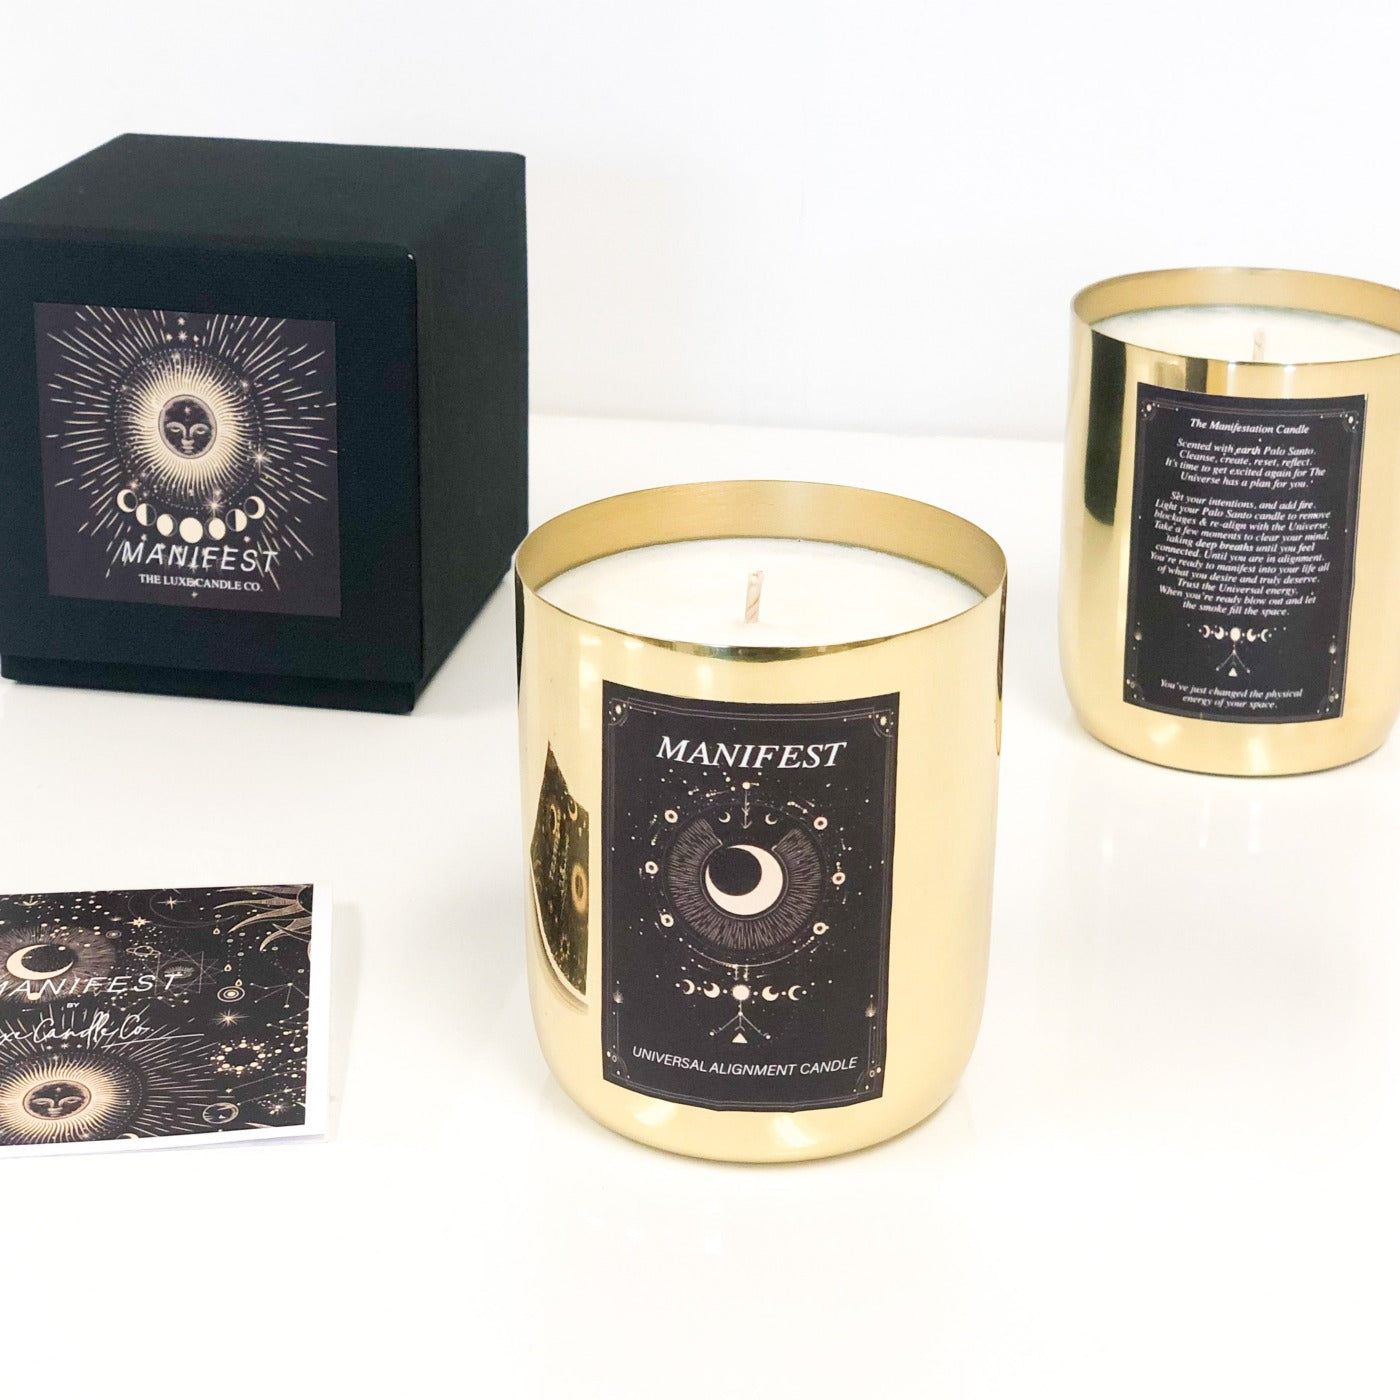 Universal energy alignment candles by The Luxe Candle Co